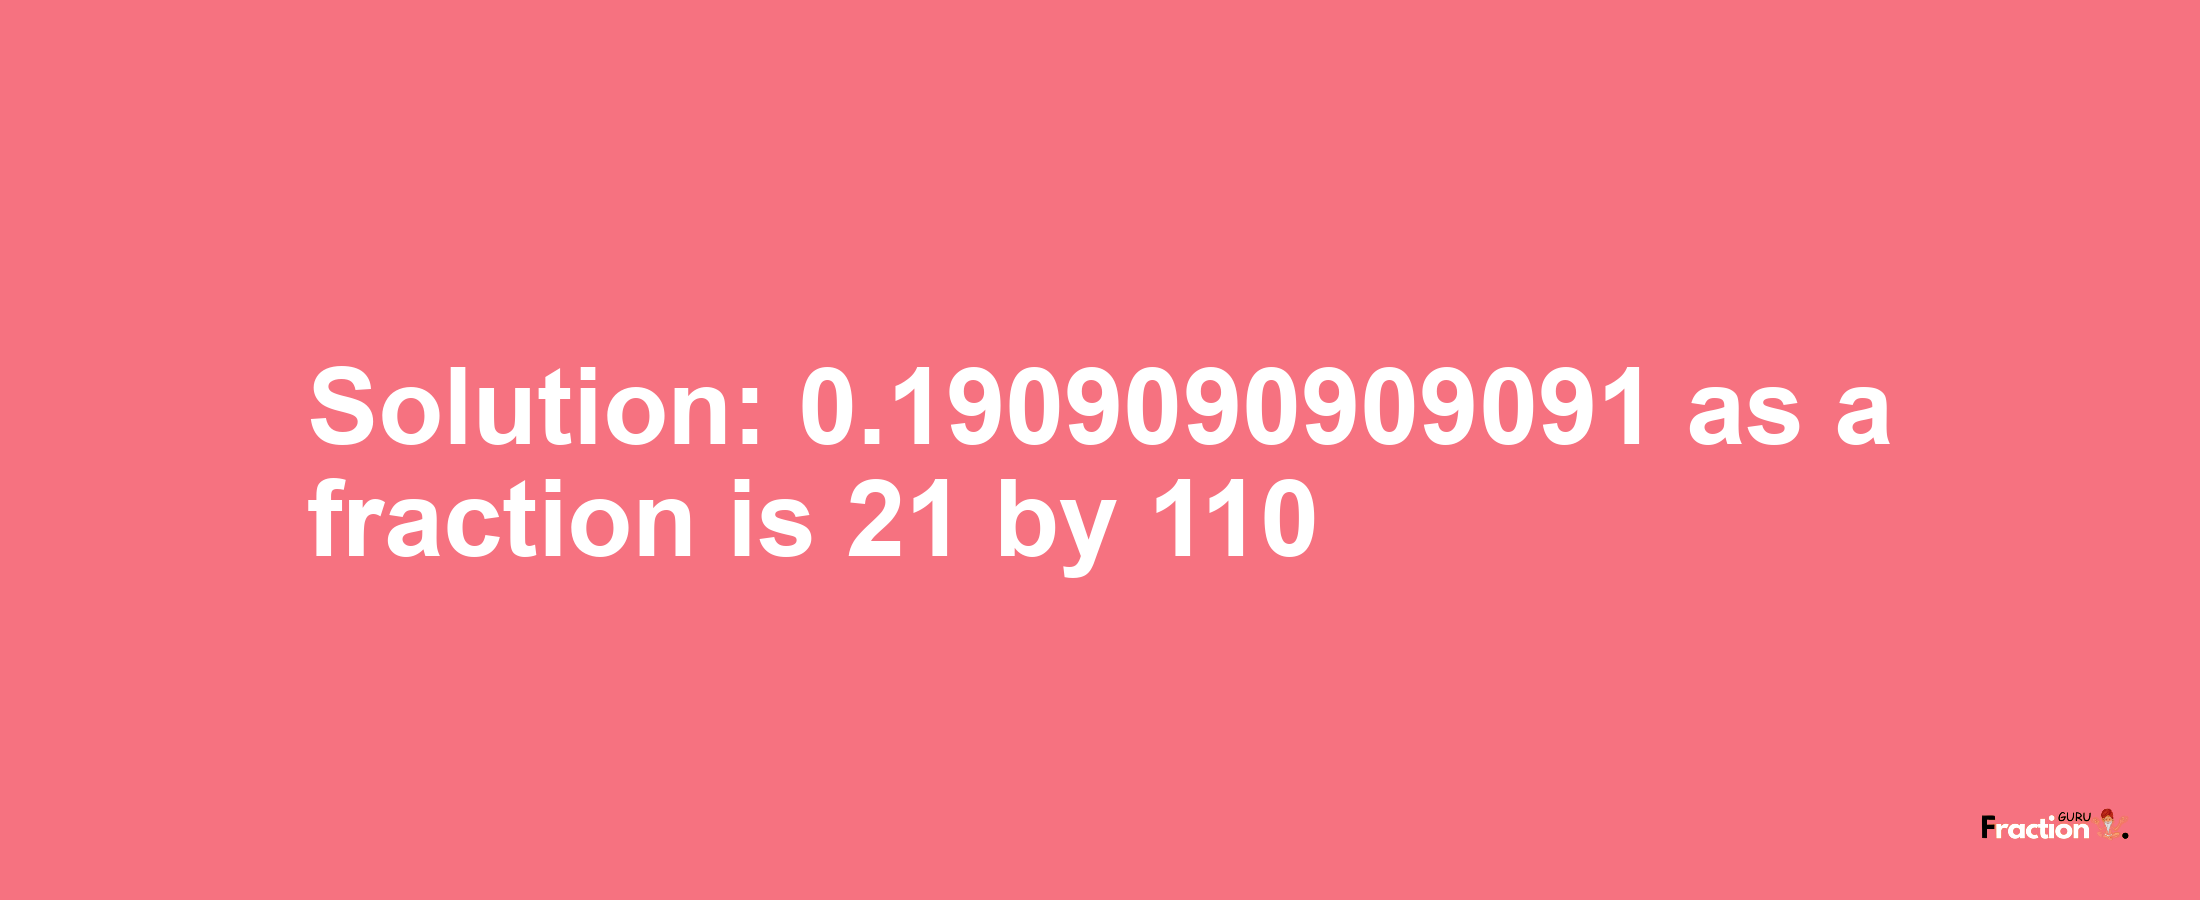 Solution:0.1909090909091 as a fraction is 21/110